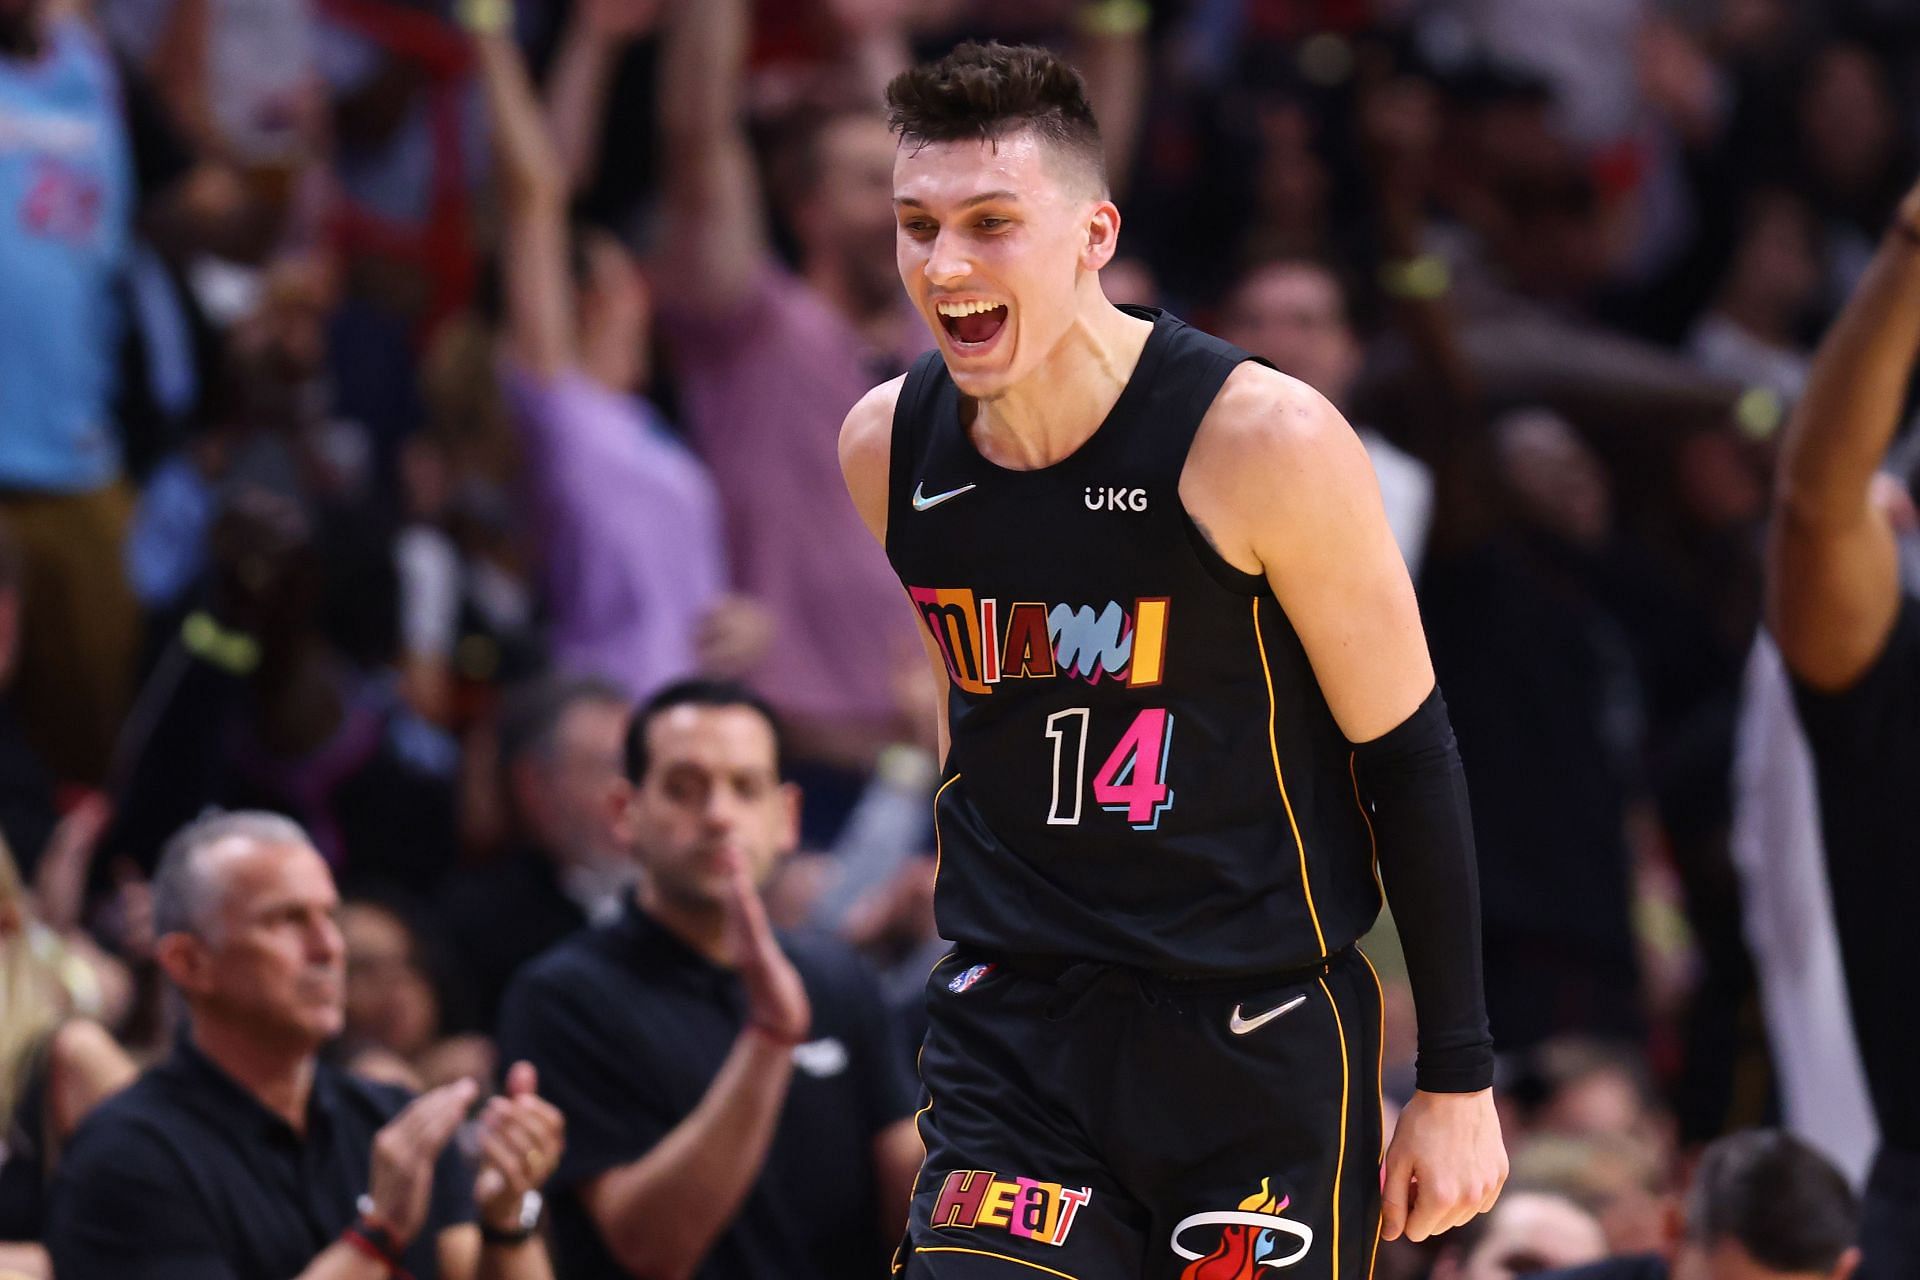 Miami Heat guard Tyler Herro continues to impress as a potential Sixth Man of the Year